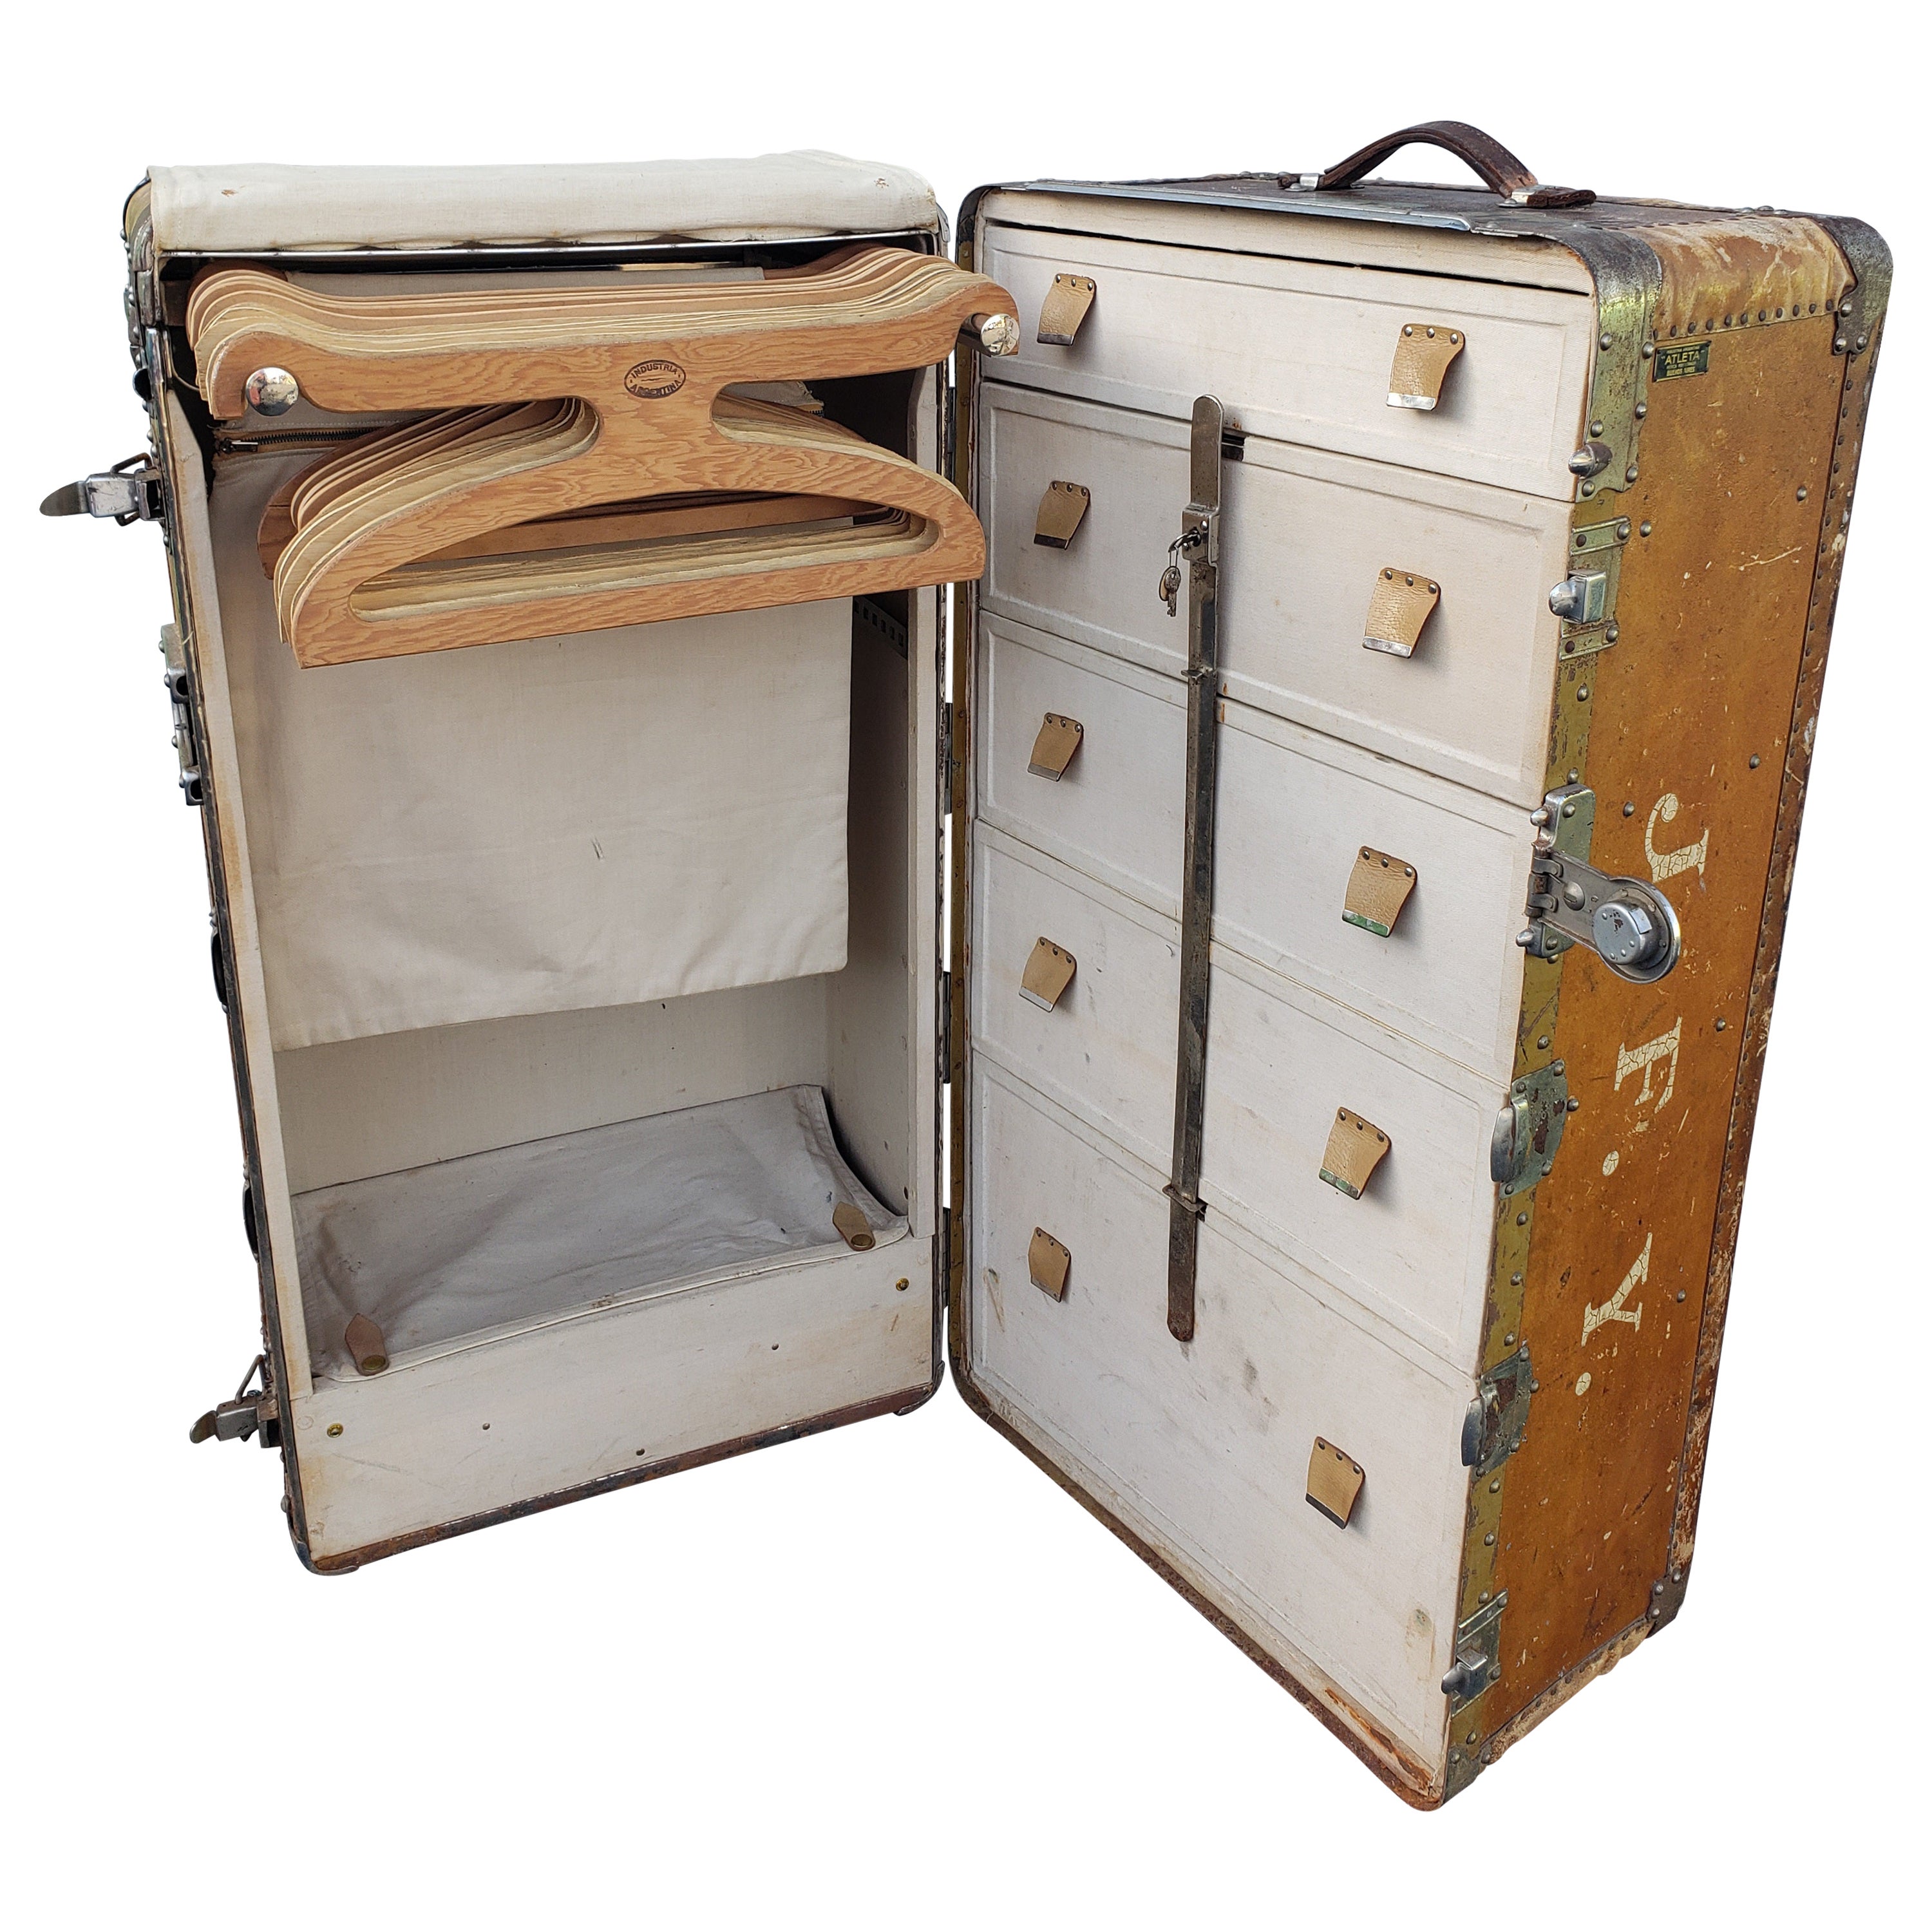 Do people still travel with steamer trunks?